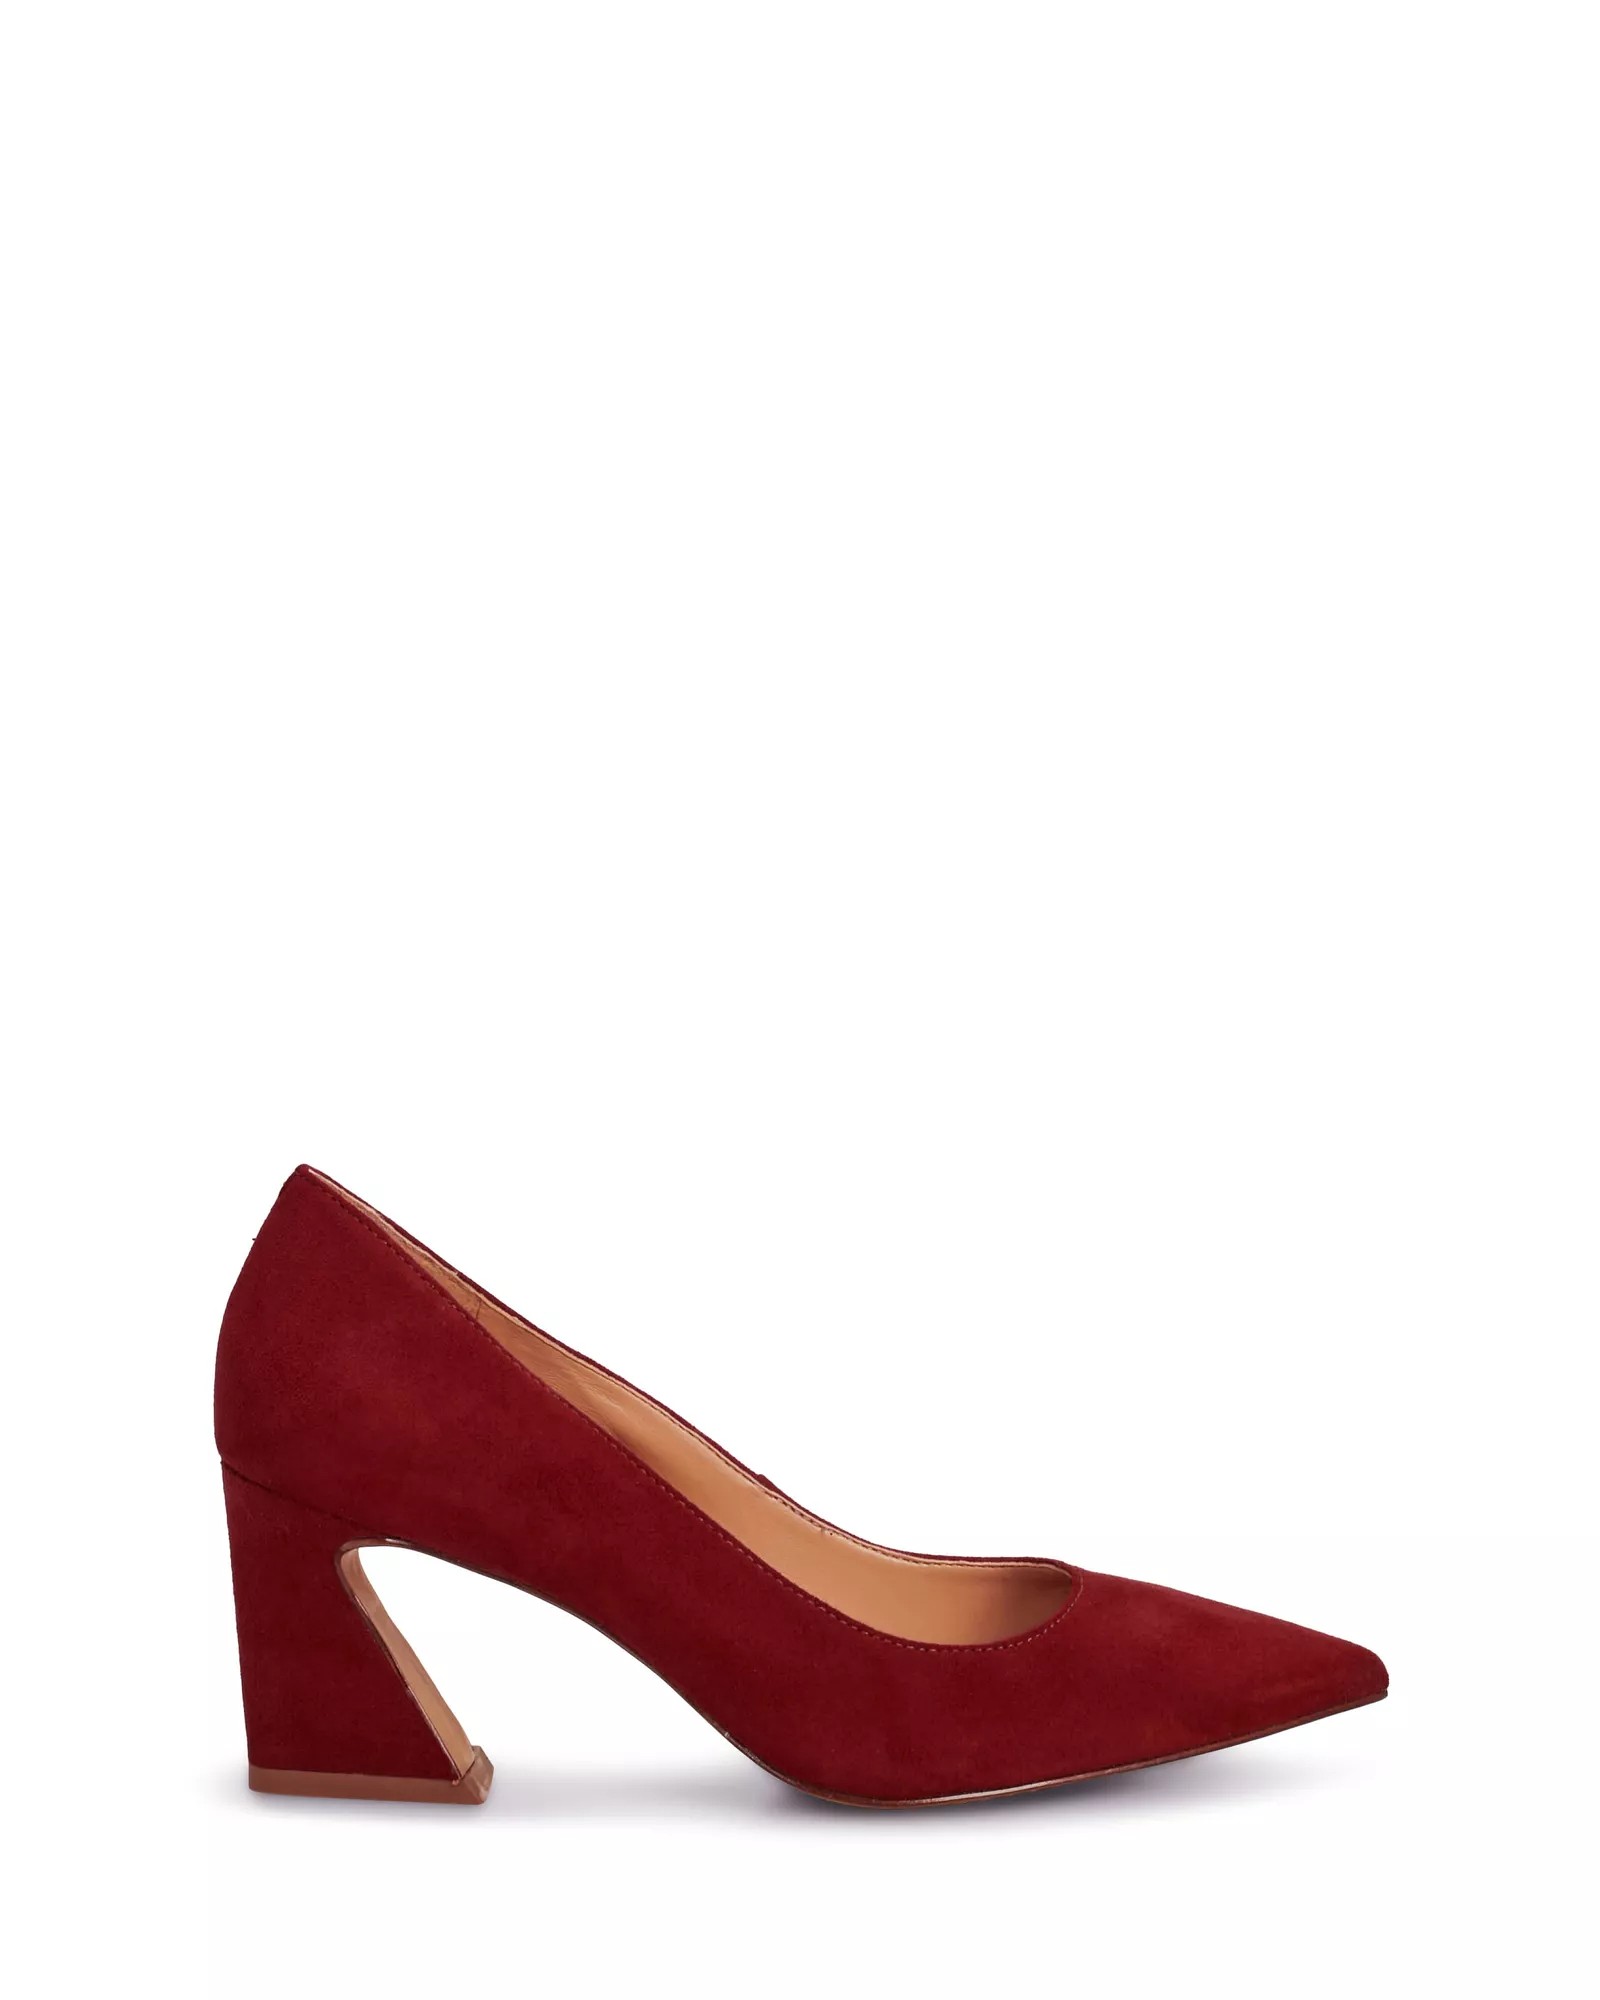 Women's Vince Camuto Hailenda Pumps Size 7 Red Currant Suede